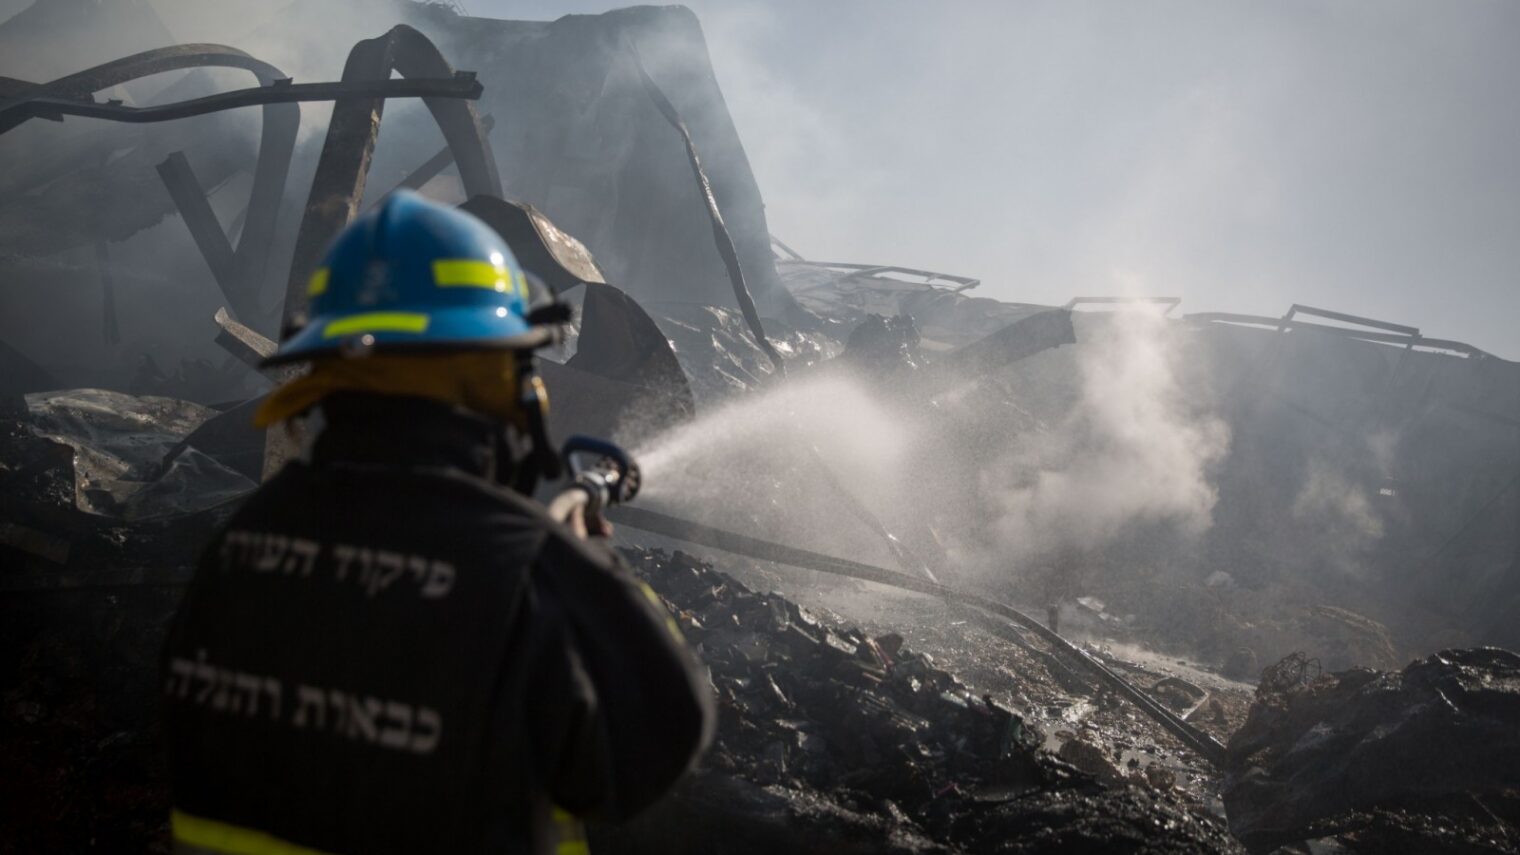 Firefighters work to extinguish a fire in a factory in Beit Meir, west of Jerusalem, on November 25, 2016. Photo by Hadas Parush/FLASH90